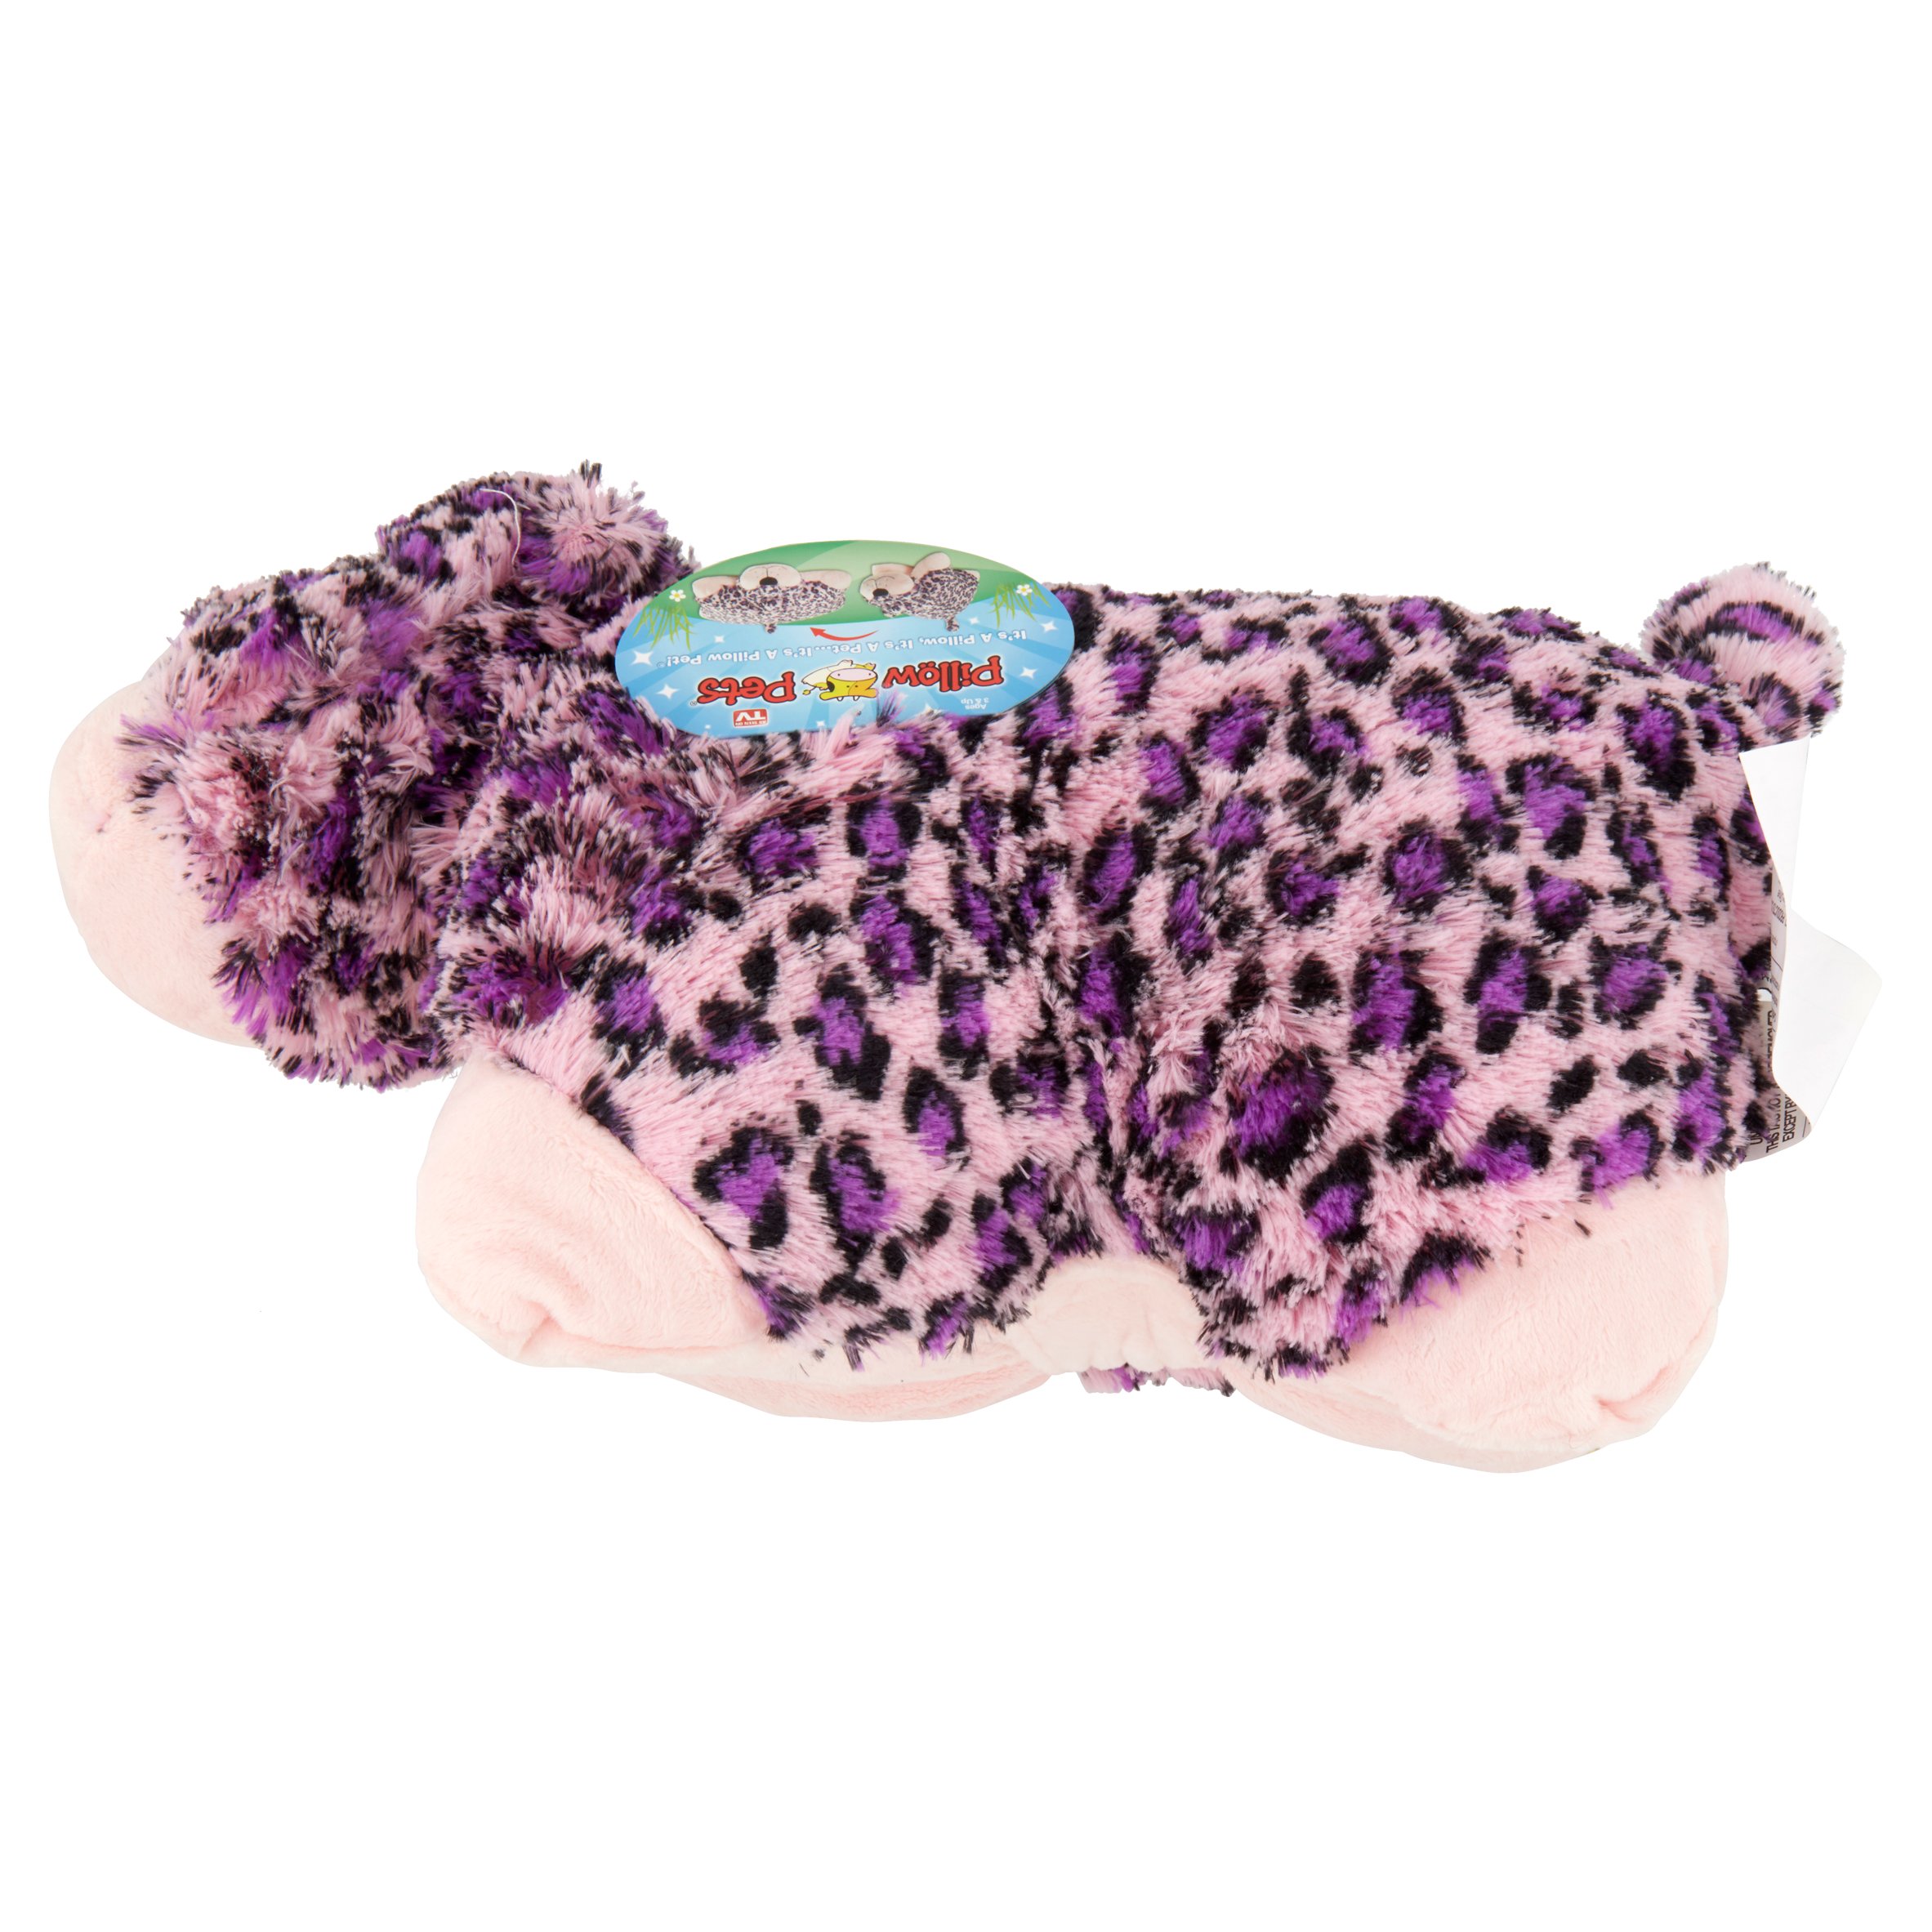 As Seen on TV Pillow Pet, Pink Leopard - image 5 of 5